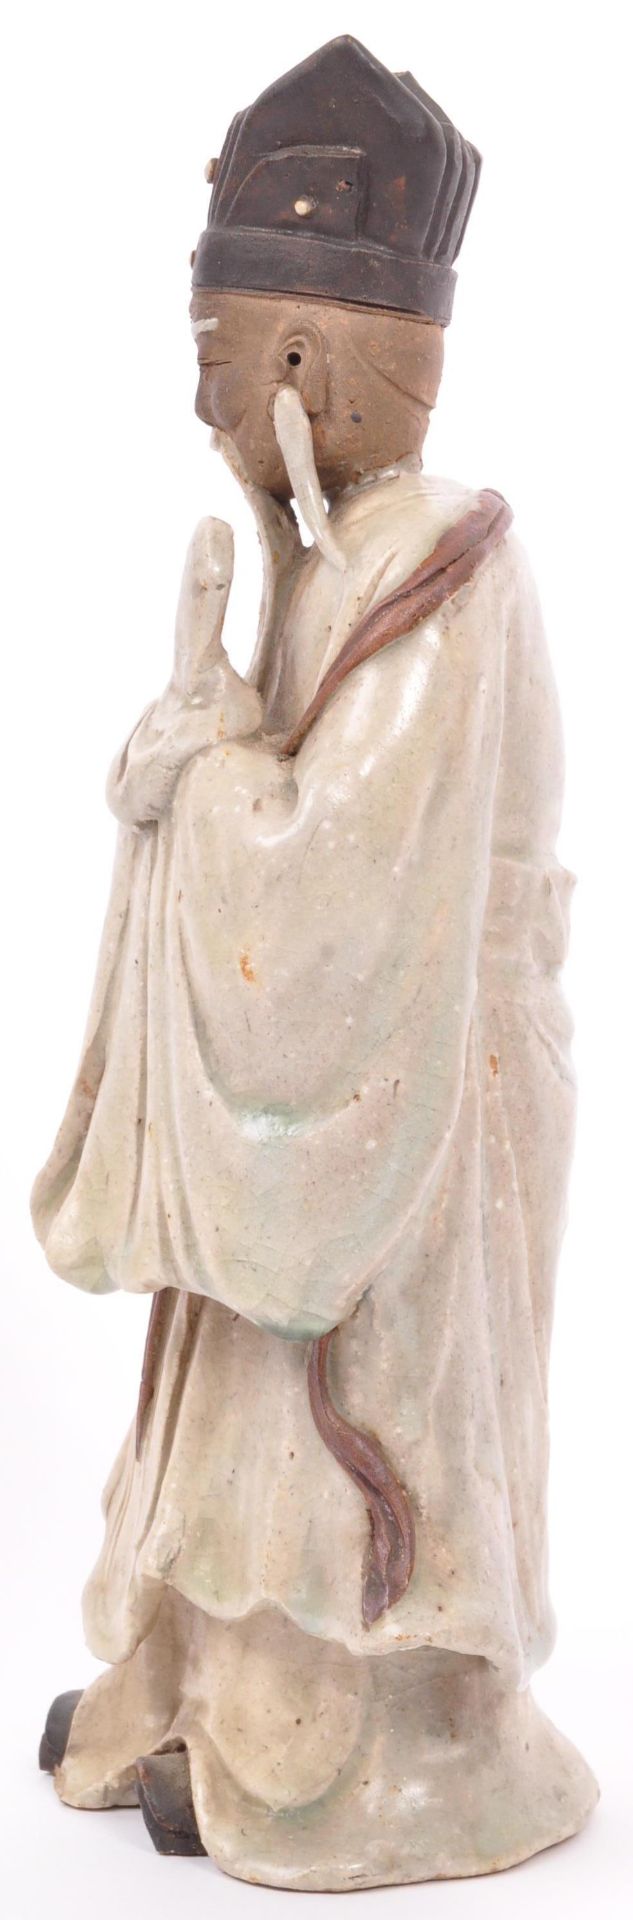 EARLY 20TH CENTURY CHINESE ORIENTAL PORCELAINE FIGURINE - Image 2 of 6